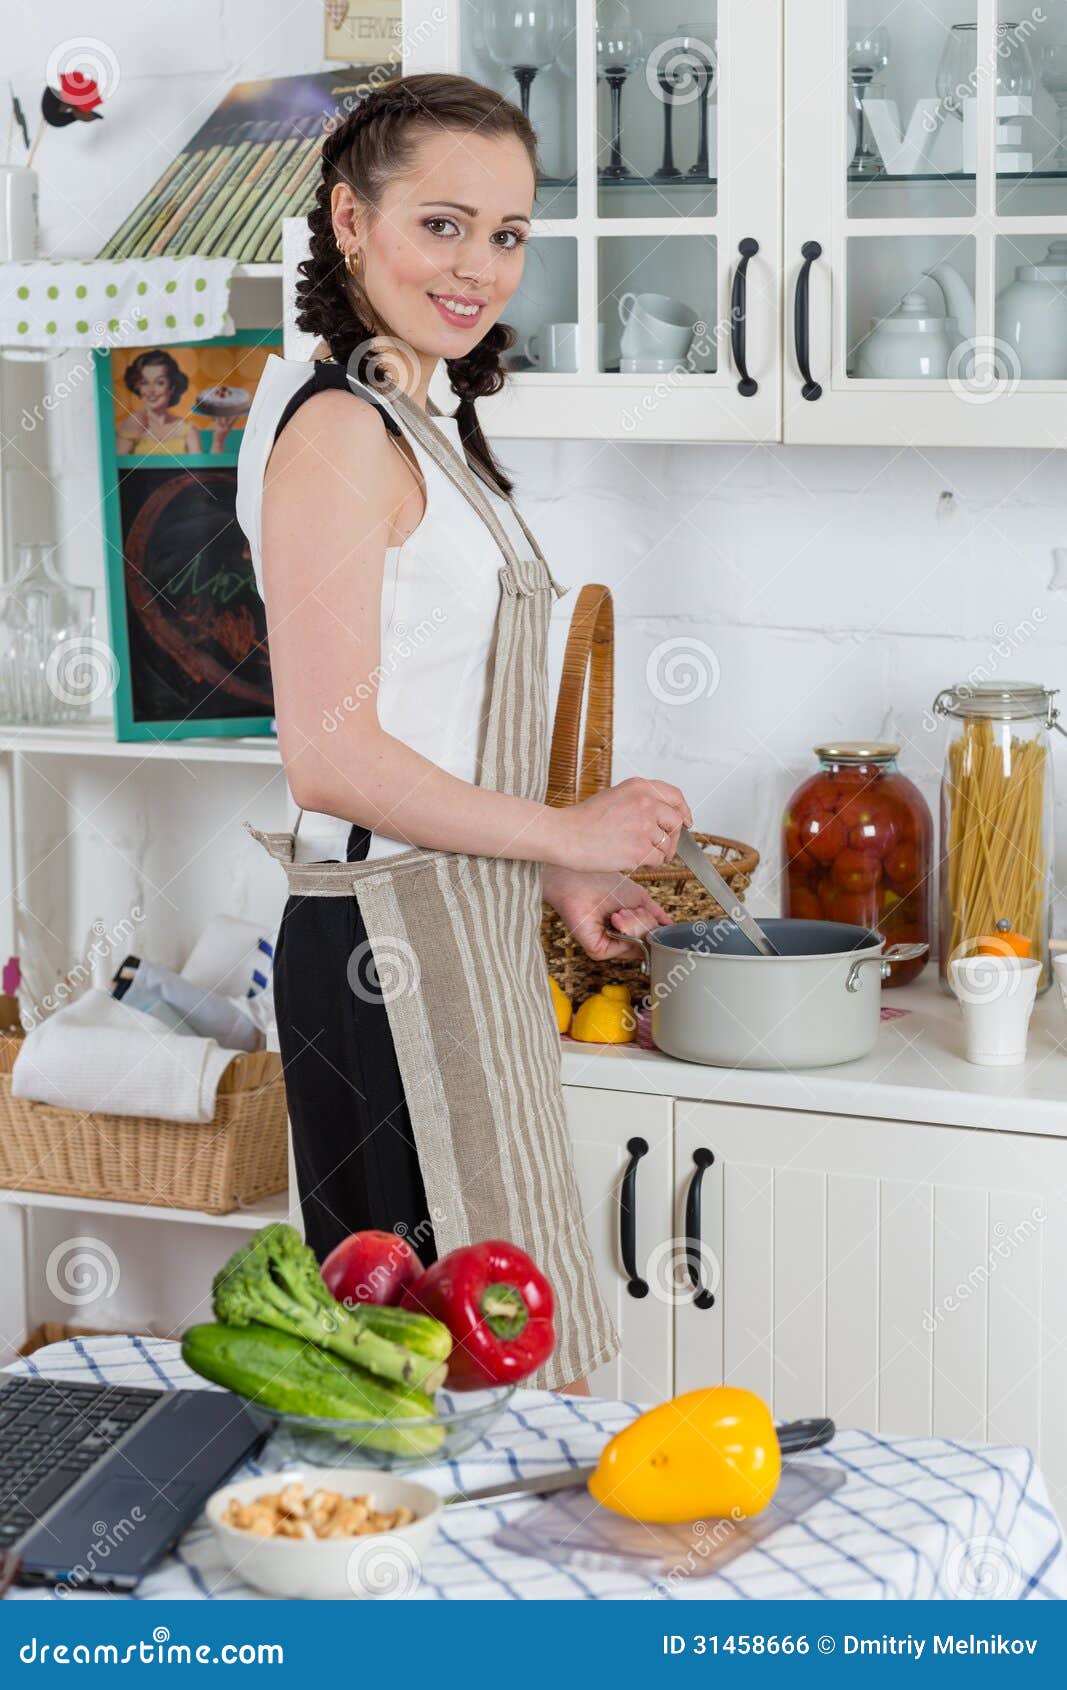 https://thumbs.dreamstime.com/z/woman-cooking-food-kitchen-beautiful-apron-healthy-31458666.jpg